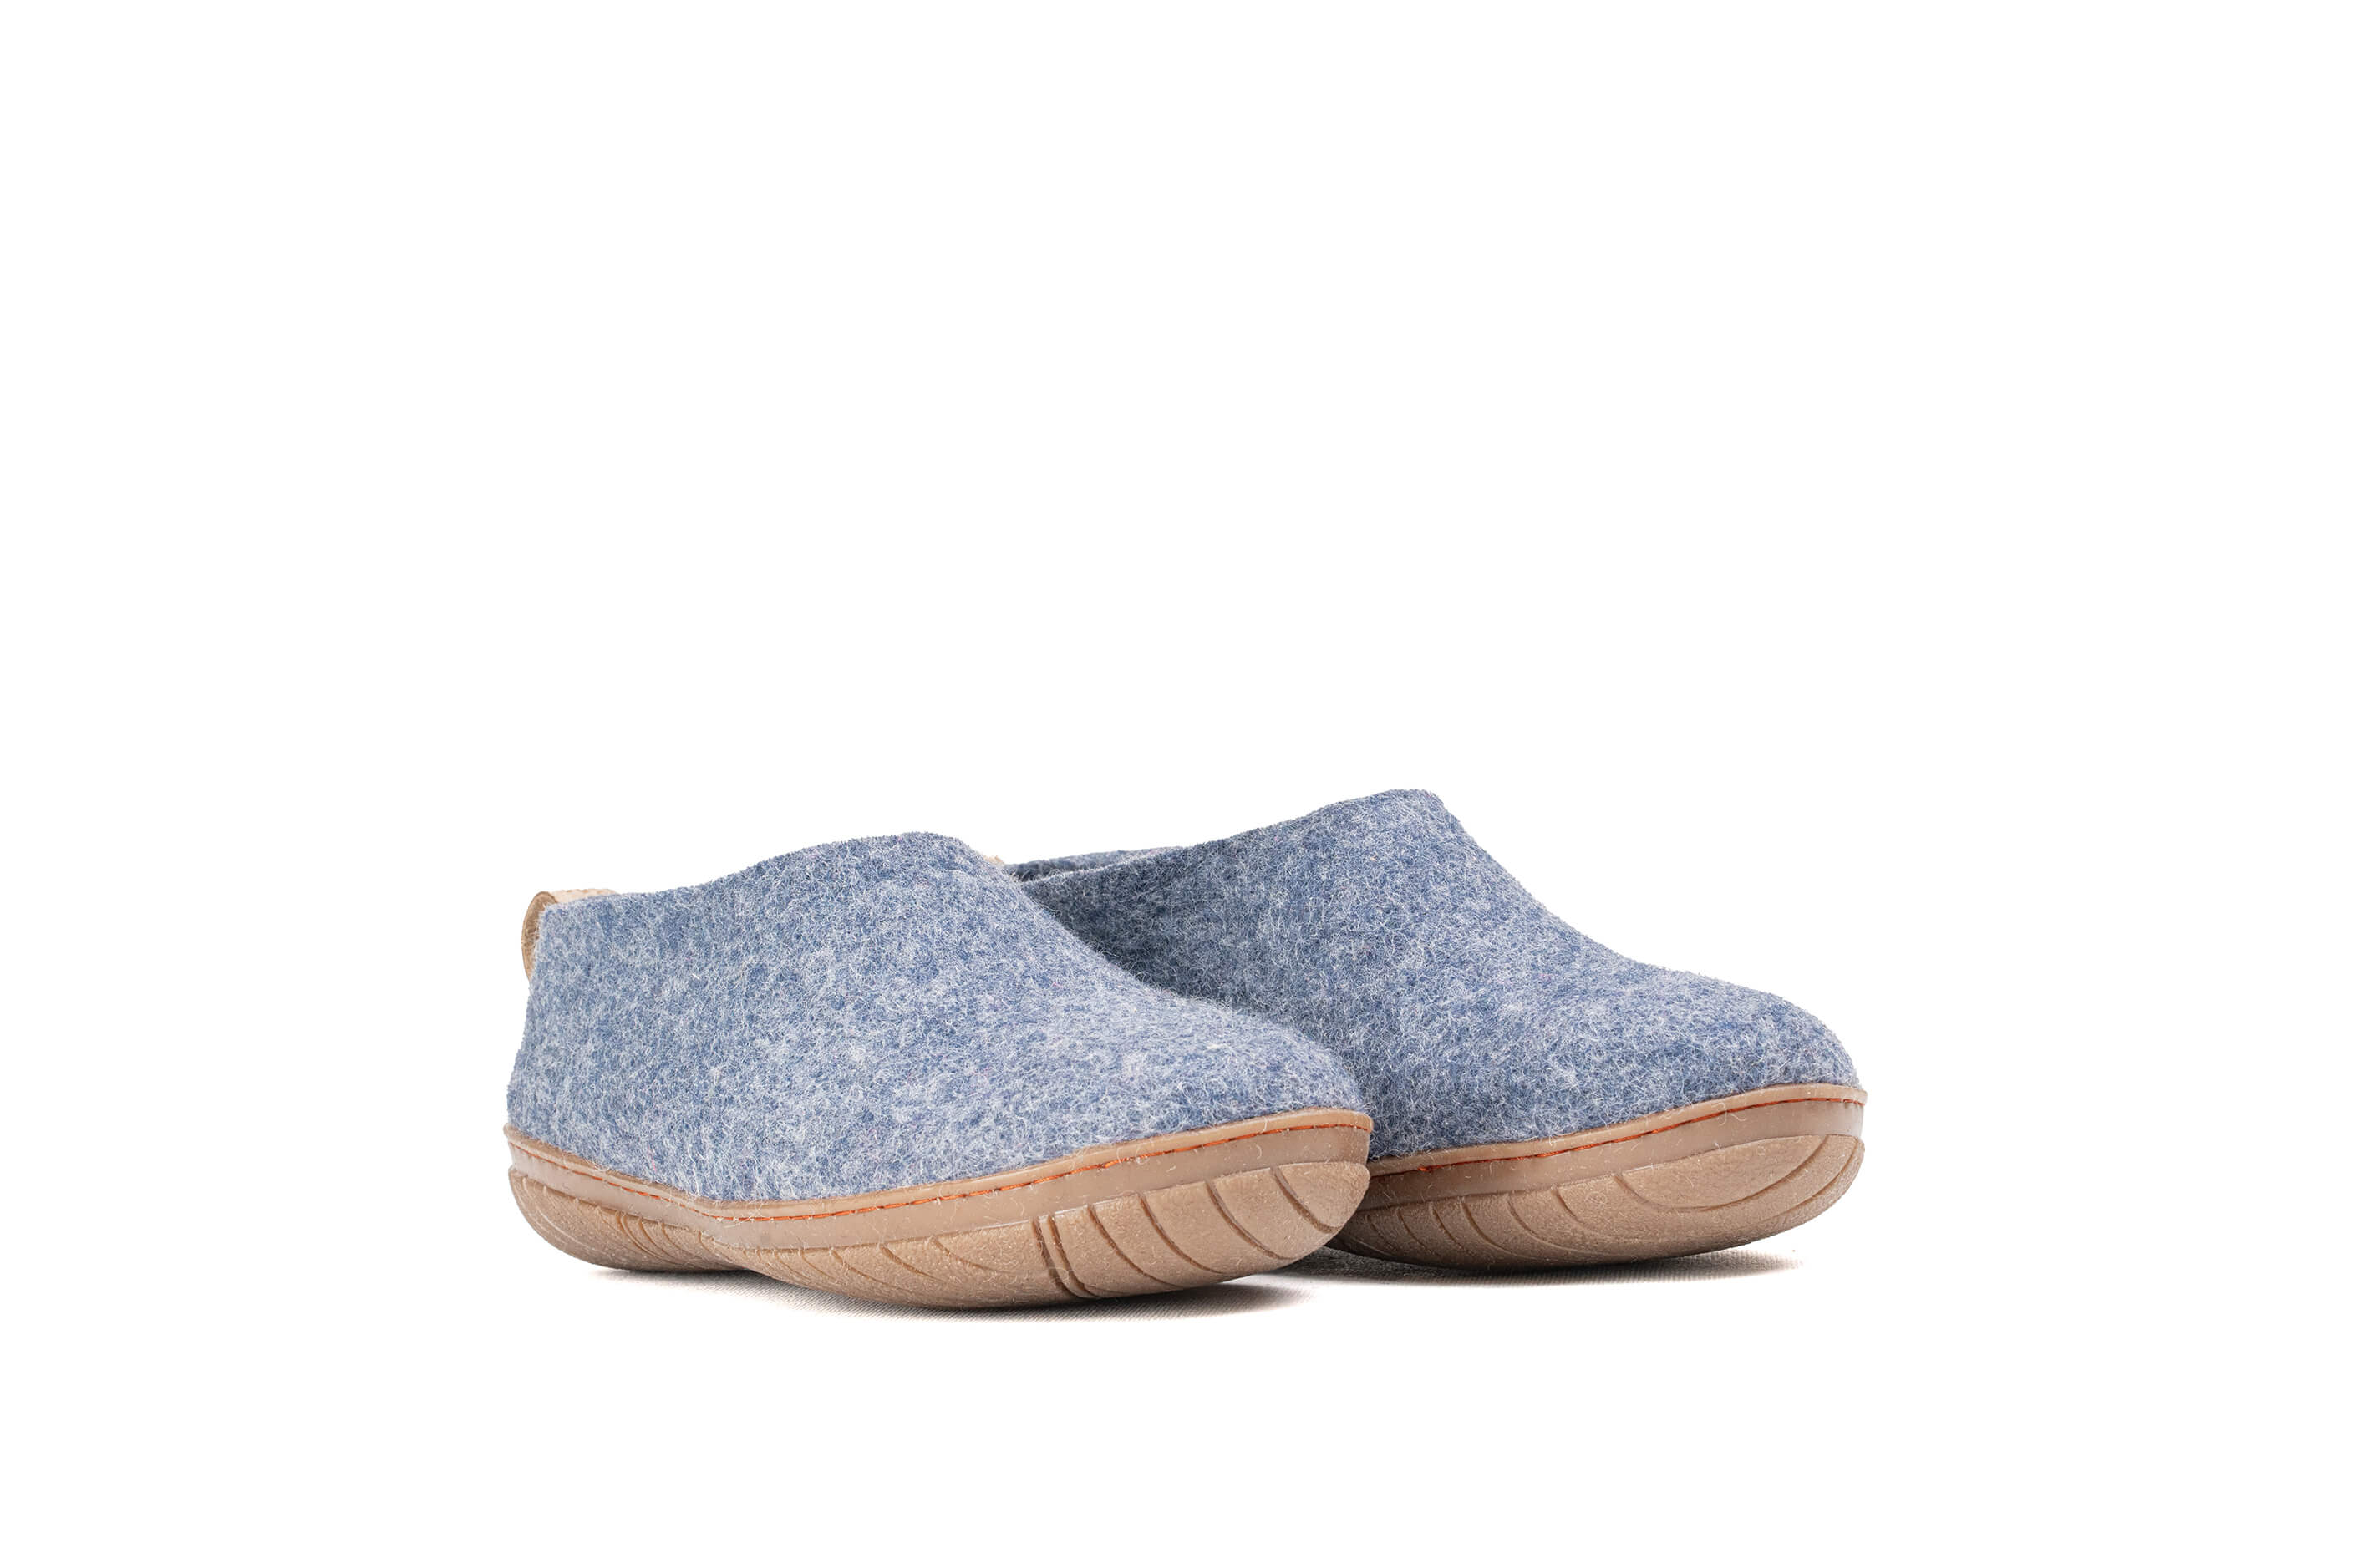 Outdoor Shoes With Rubber Sole - Denim